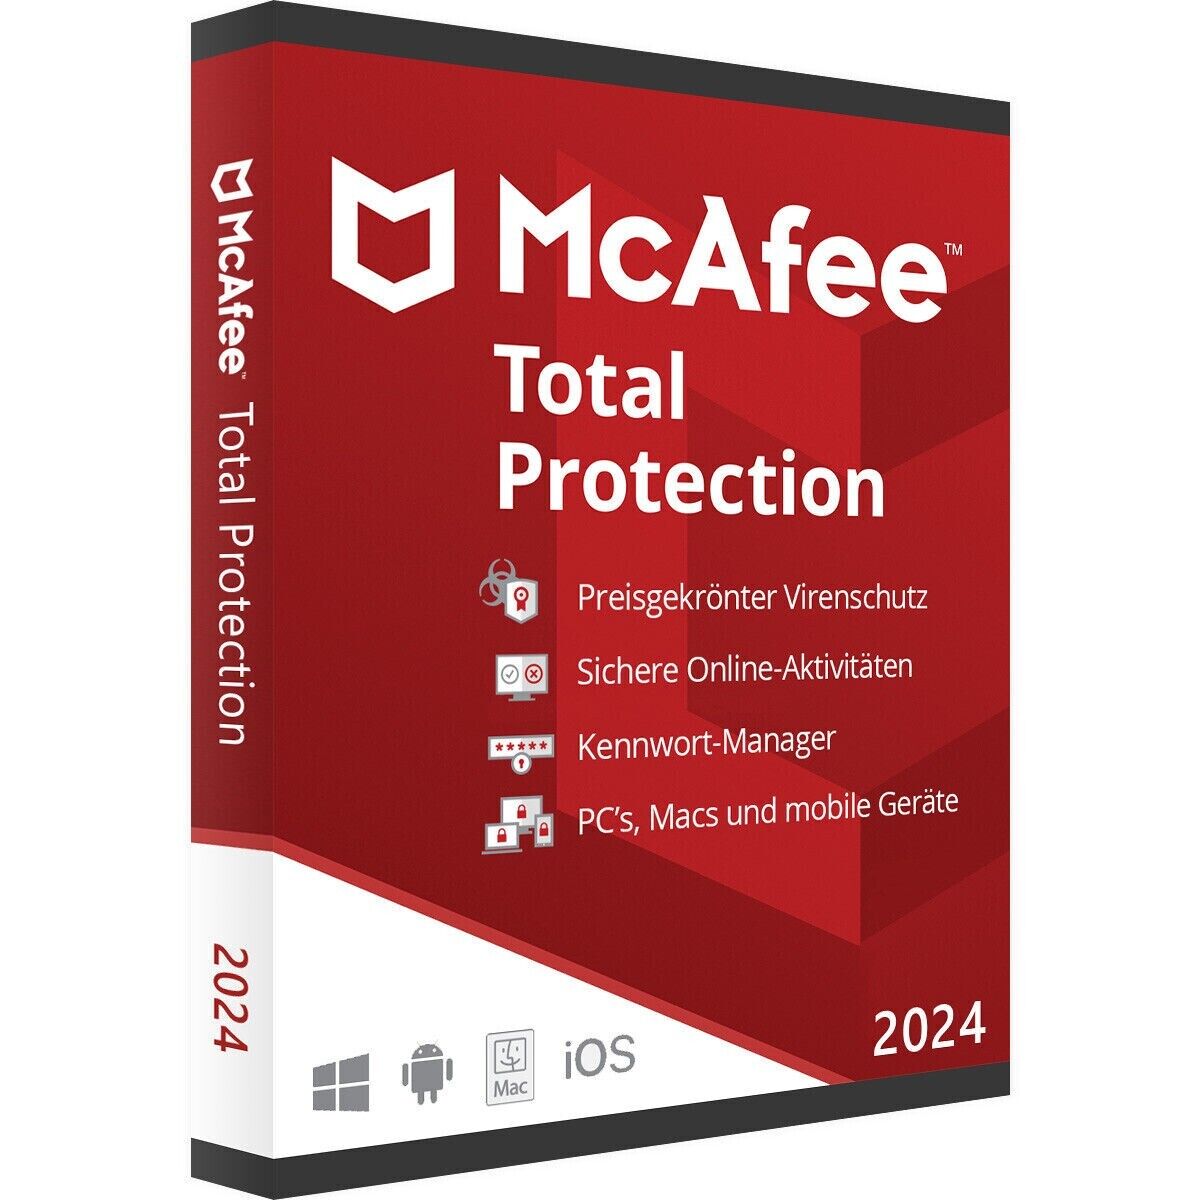 Mc@fee Total Protection 2024 1 Device 3 Years